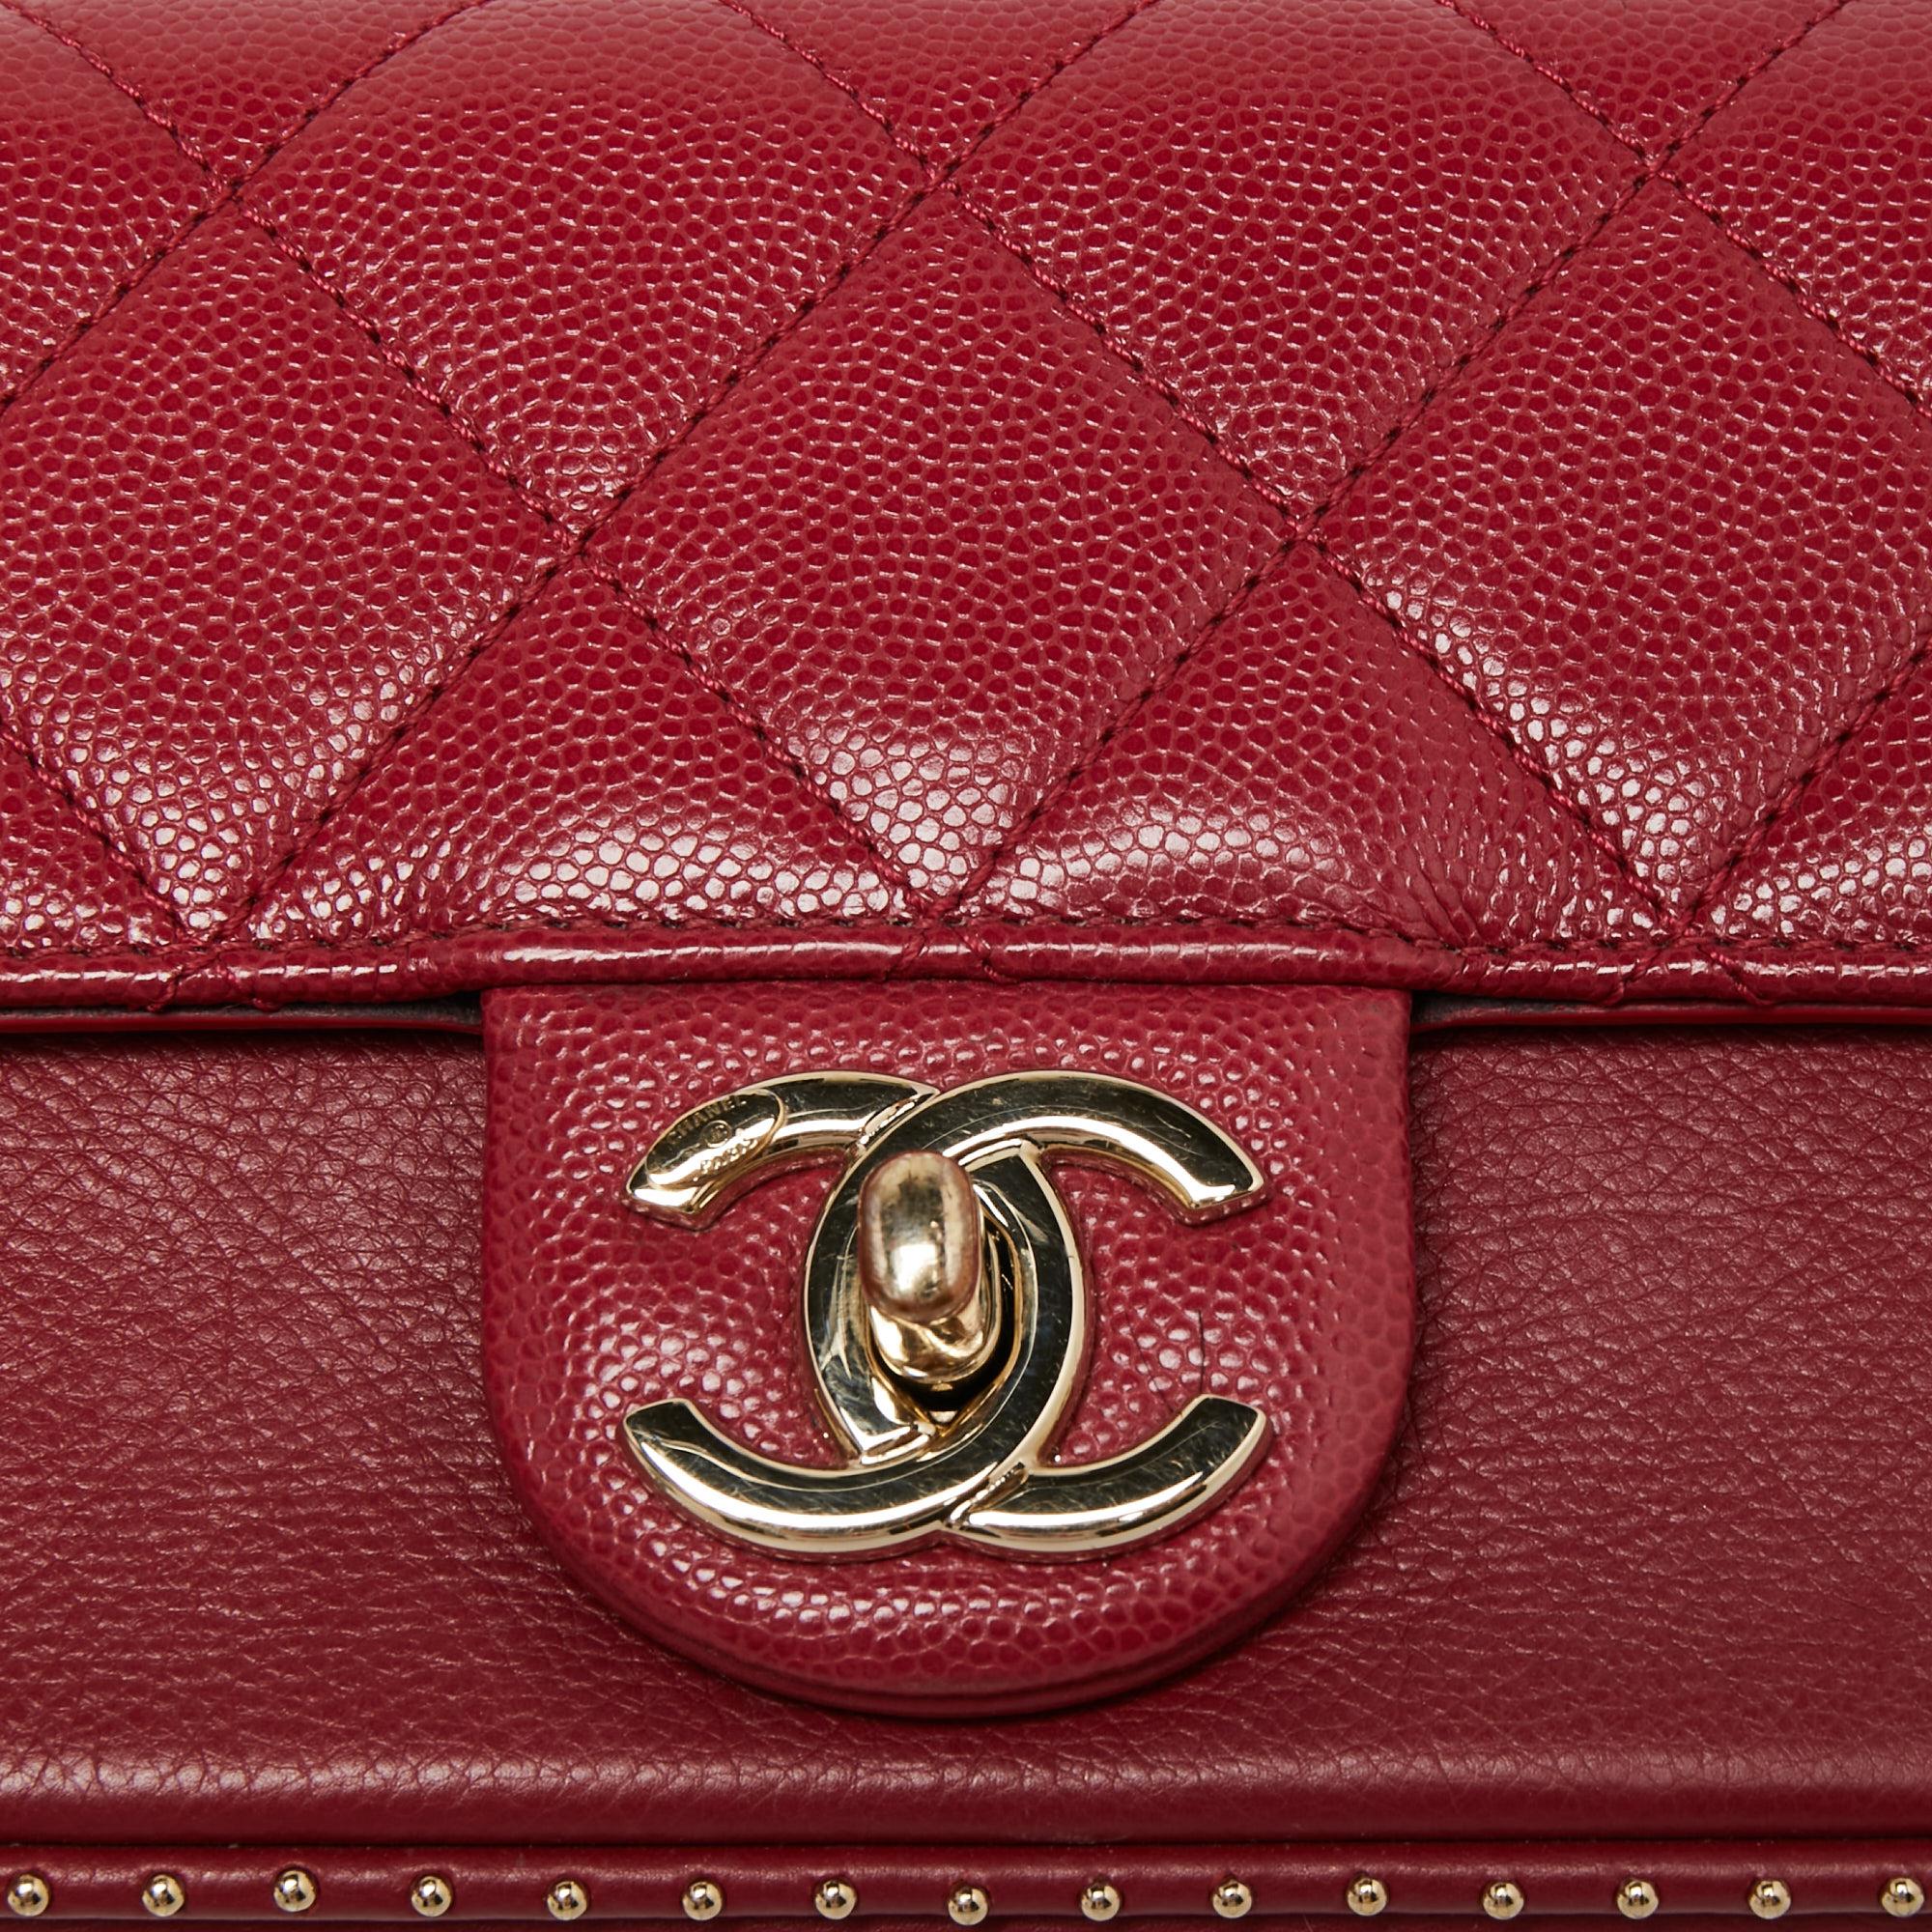 Chanel Cherry Red Caviar Quilted Leather Small Studded Flap Bag 4